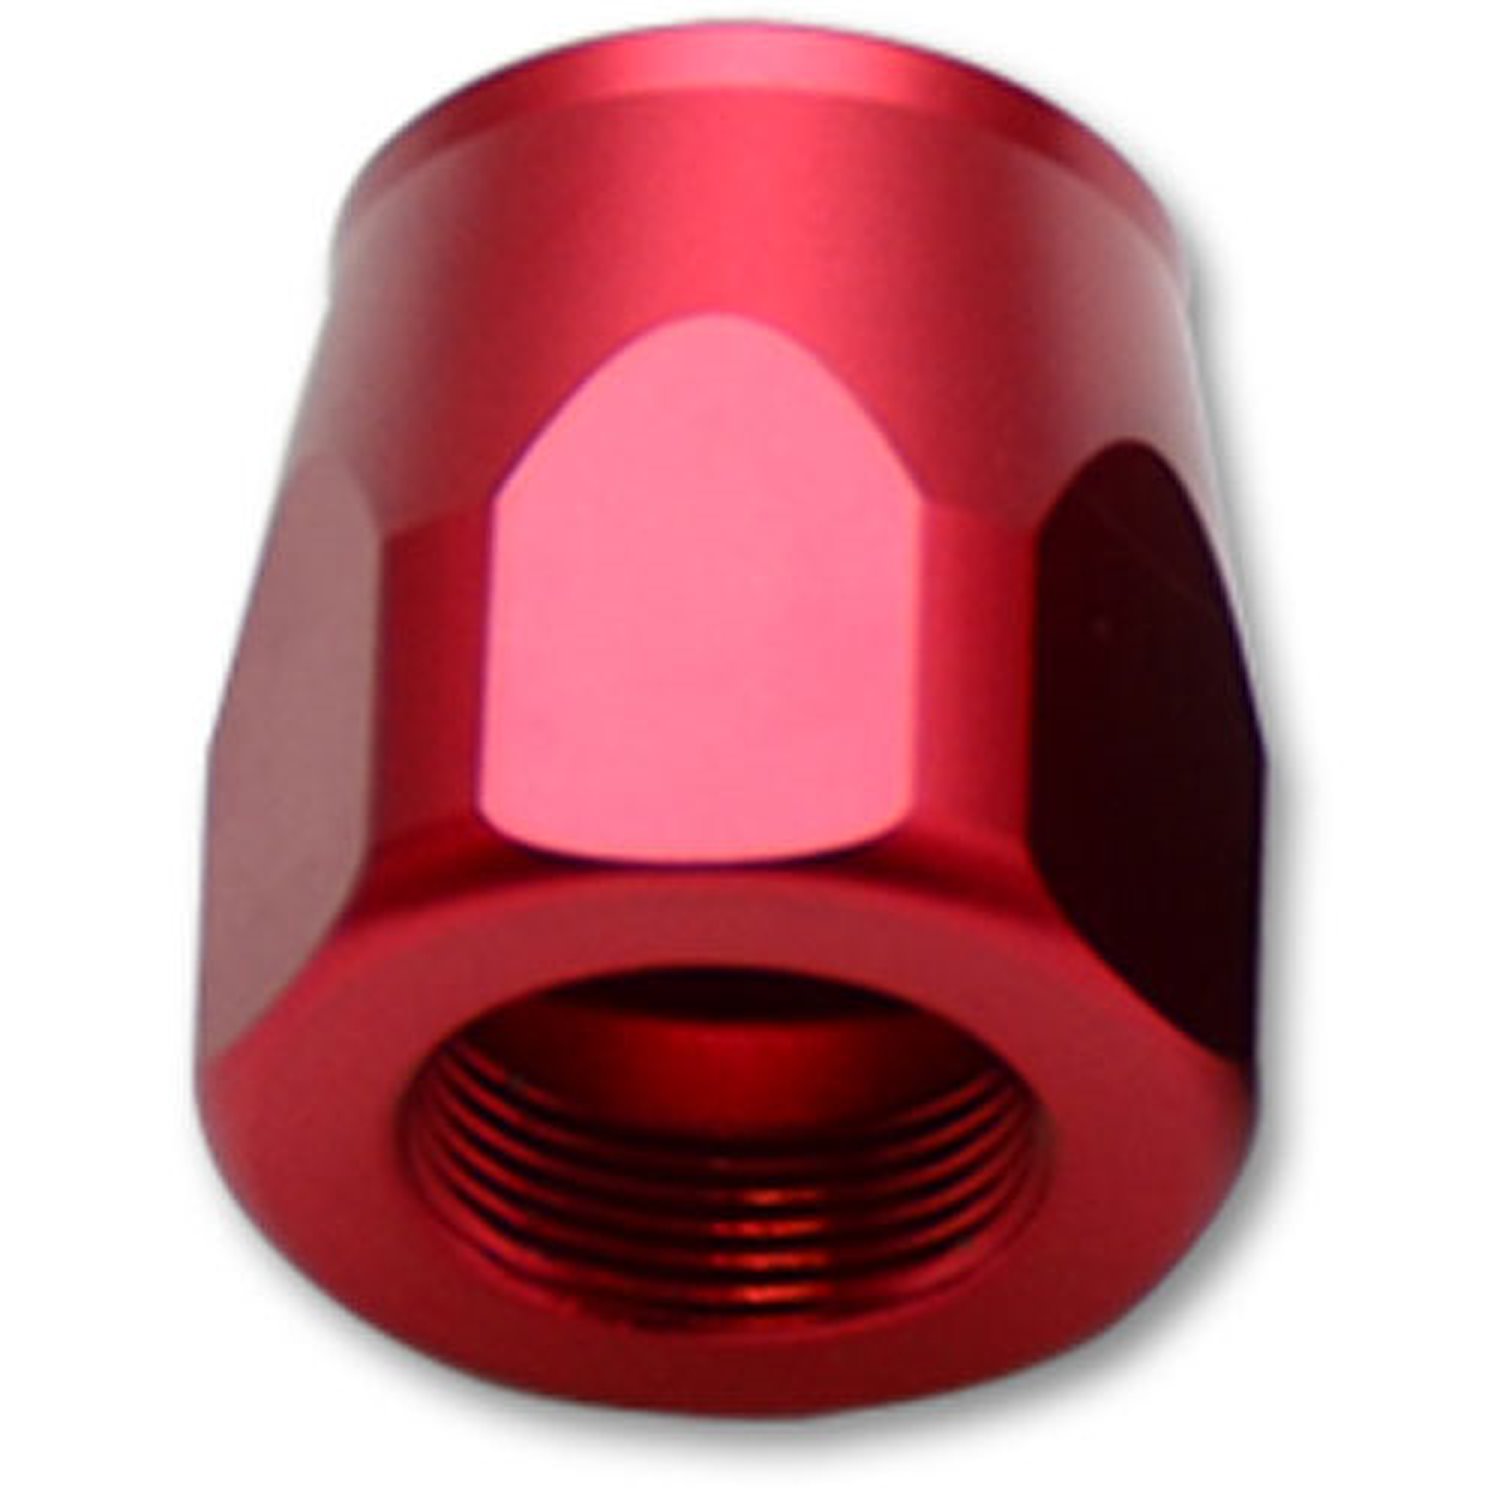 Replacement Hose End Socket -8AN